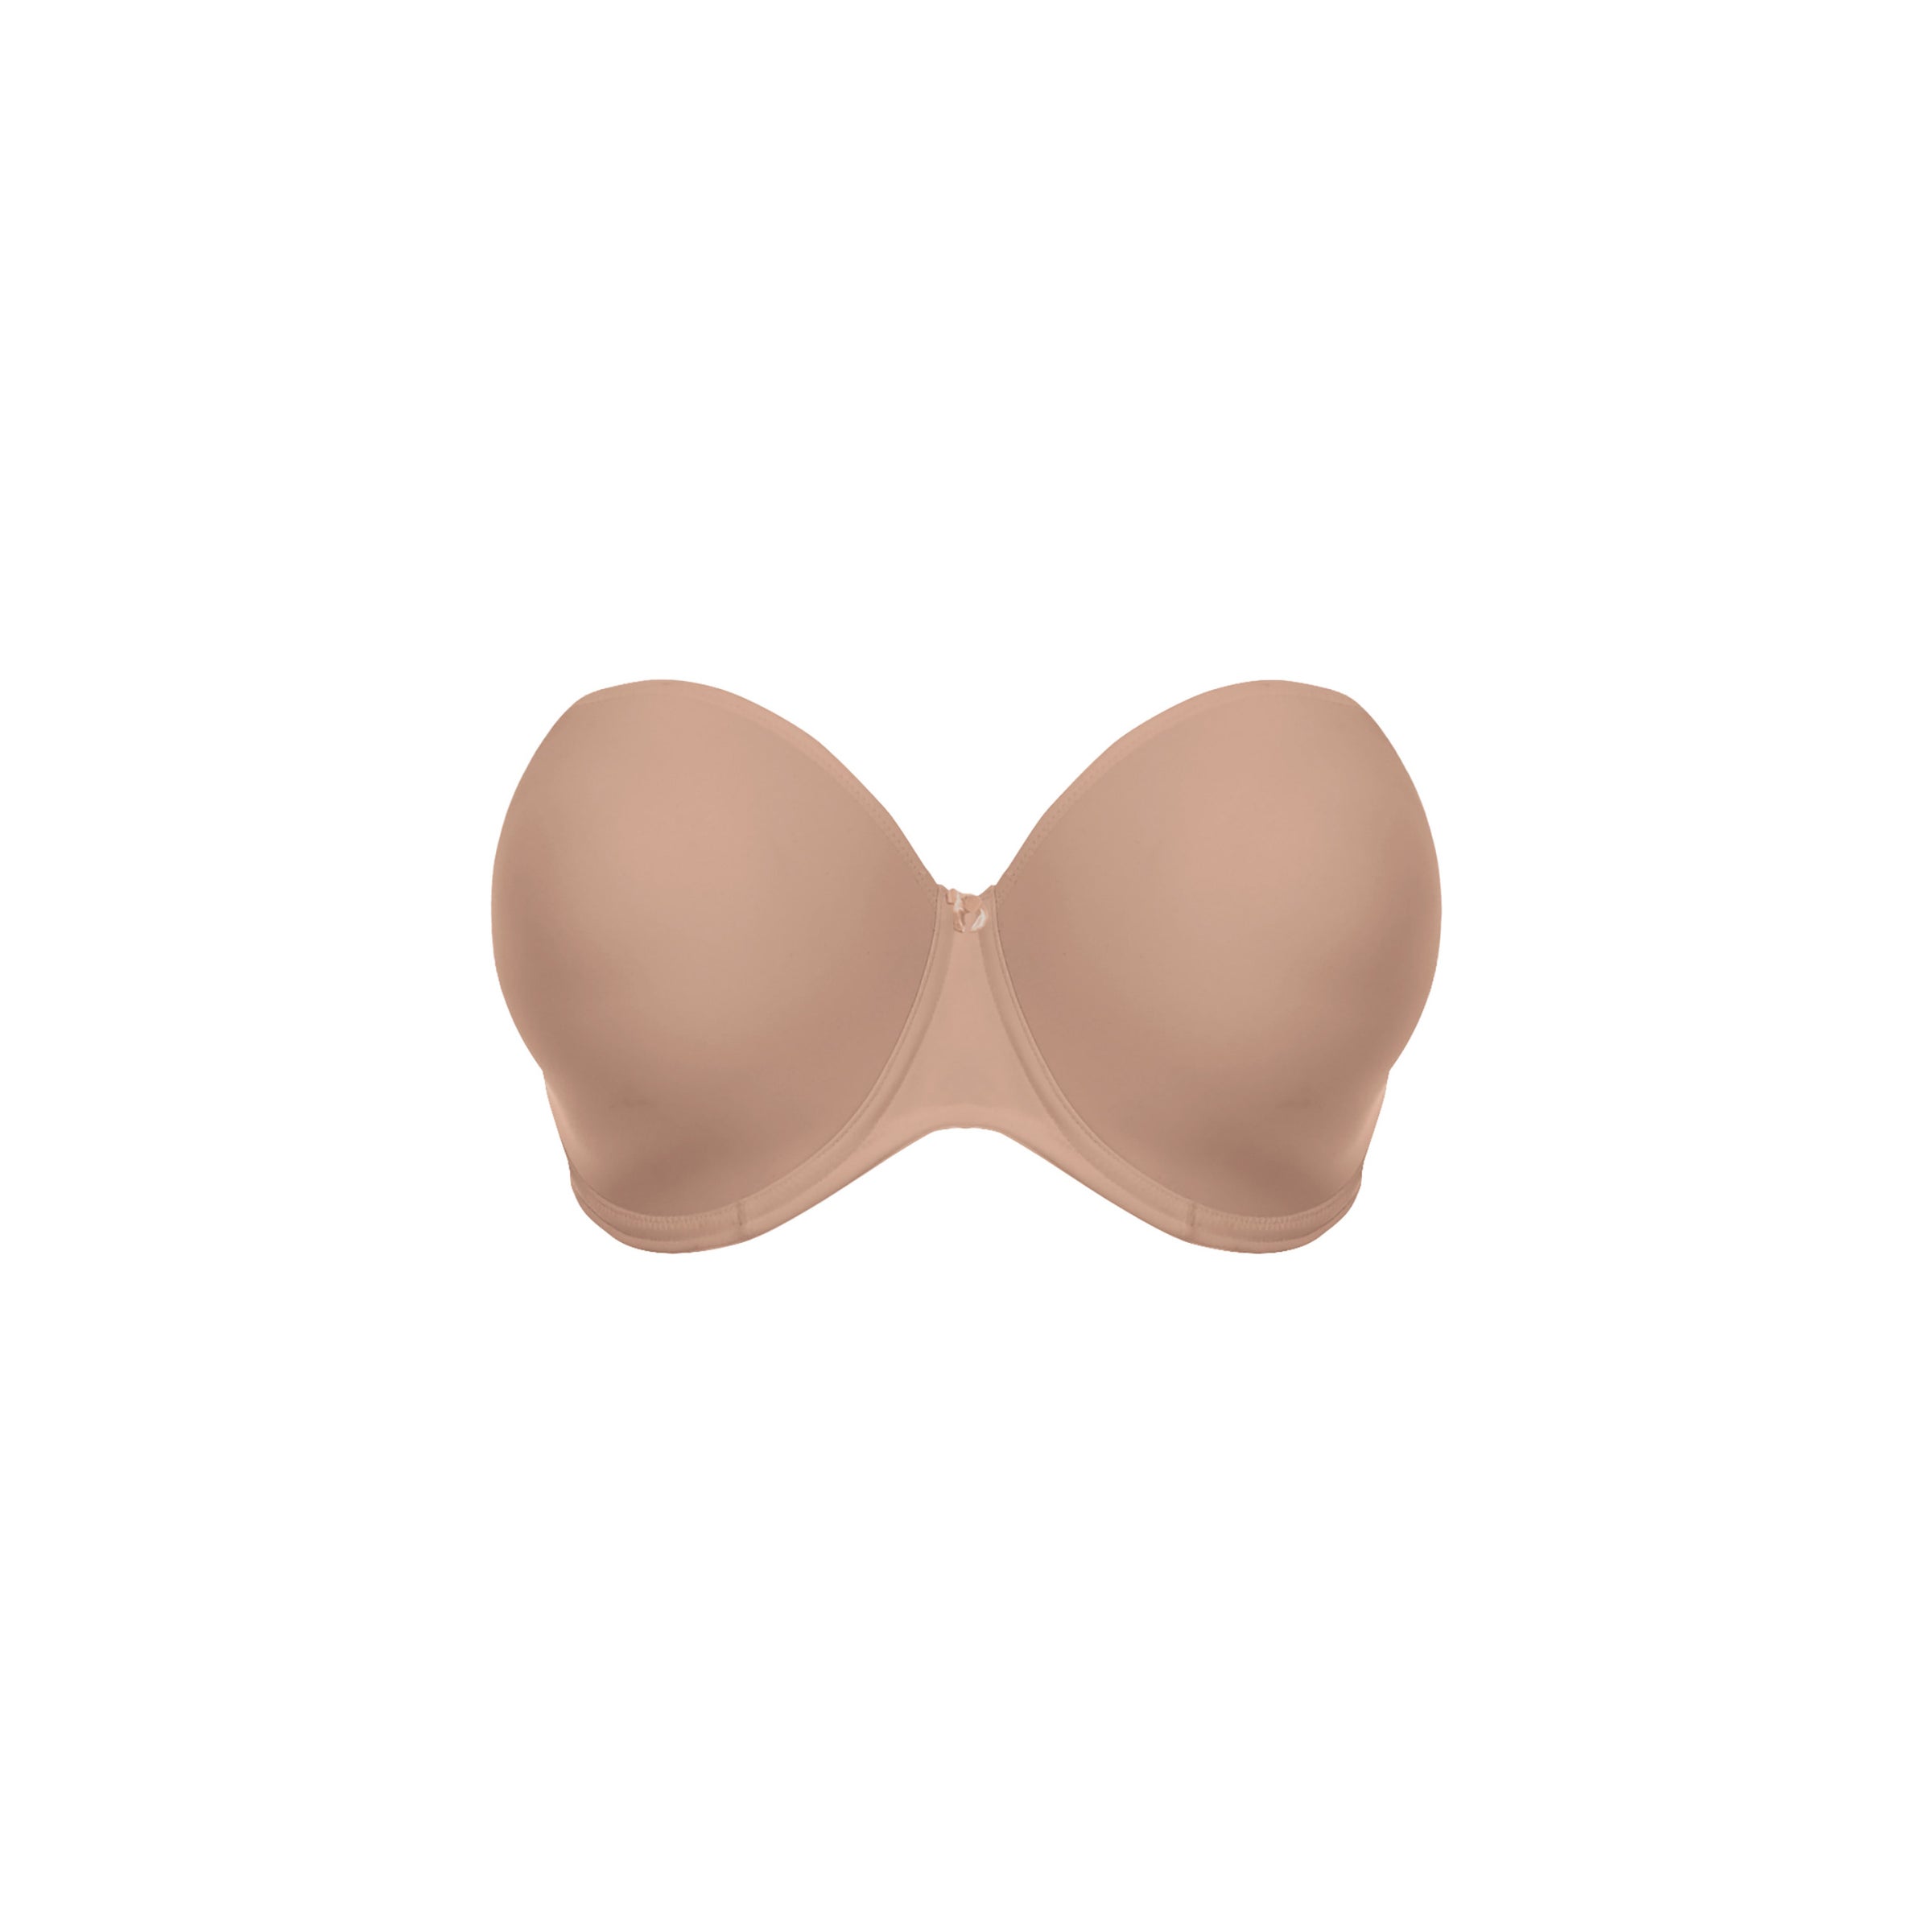 Elomi-Smooth UW Moulded Strapless Bra-Nude